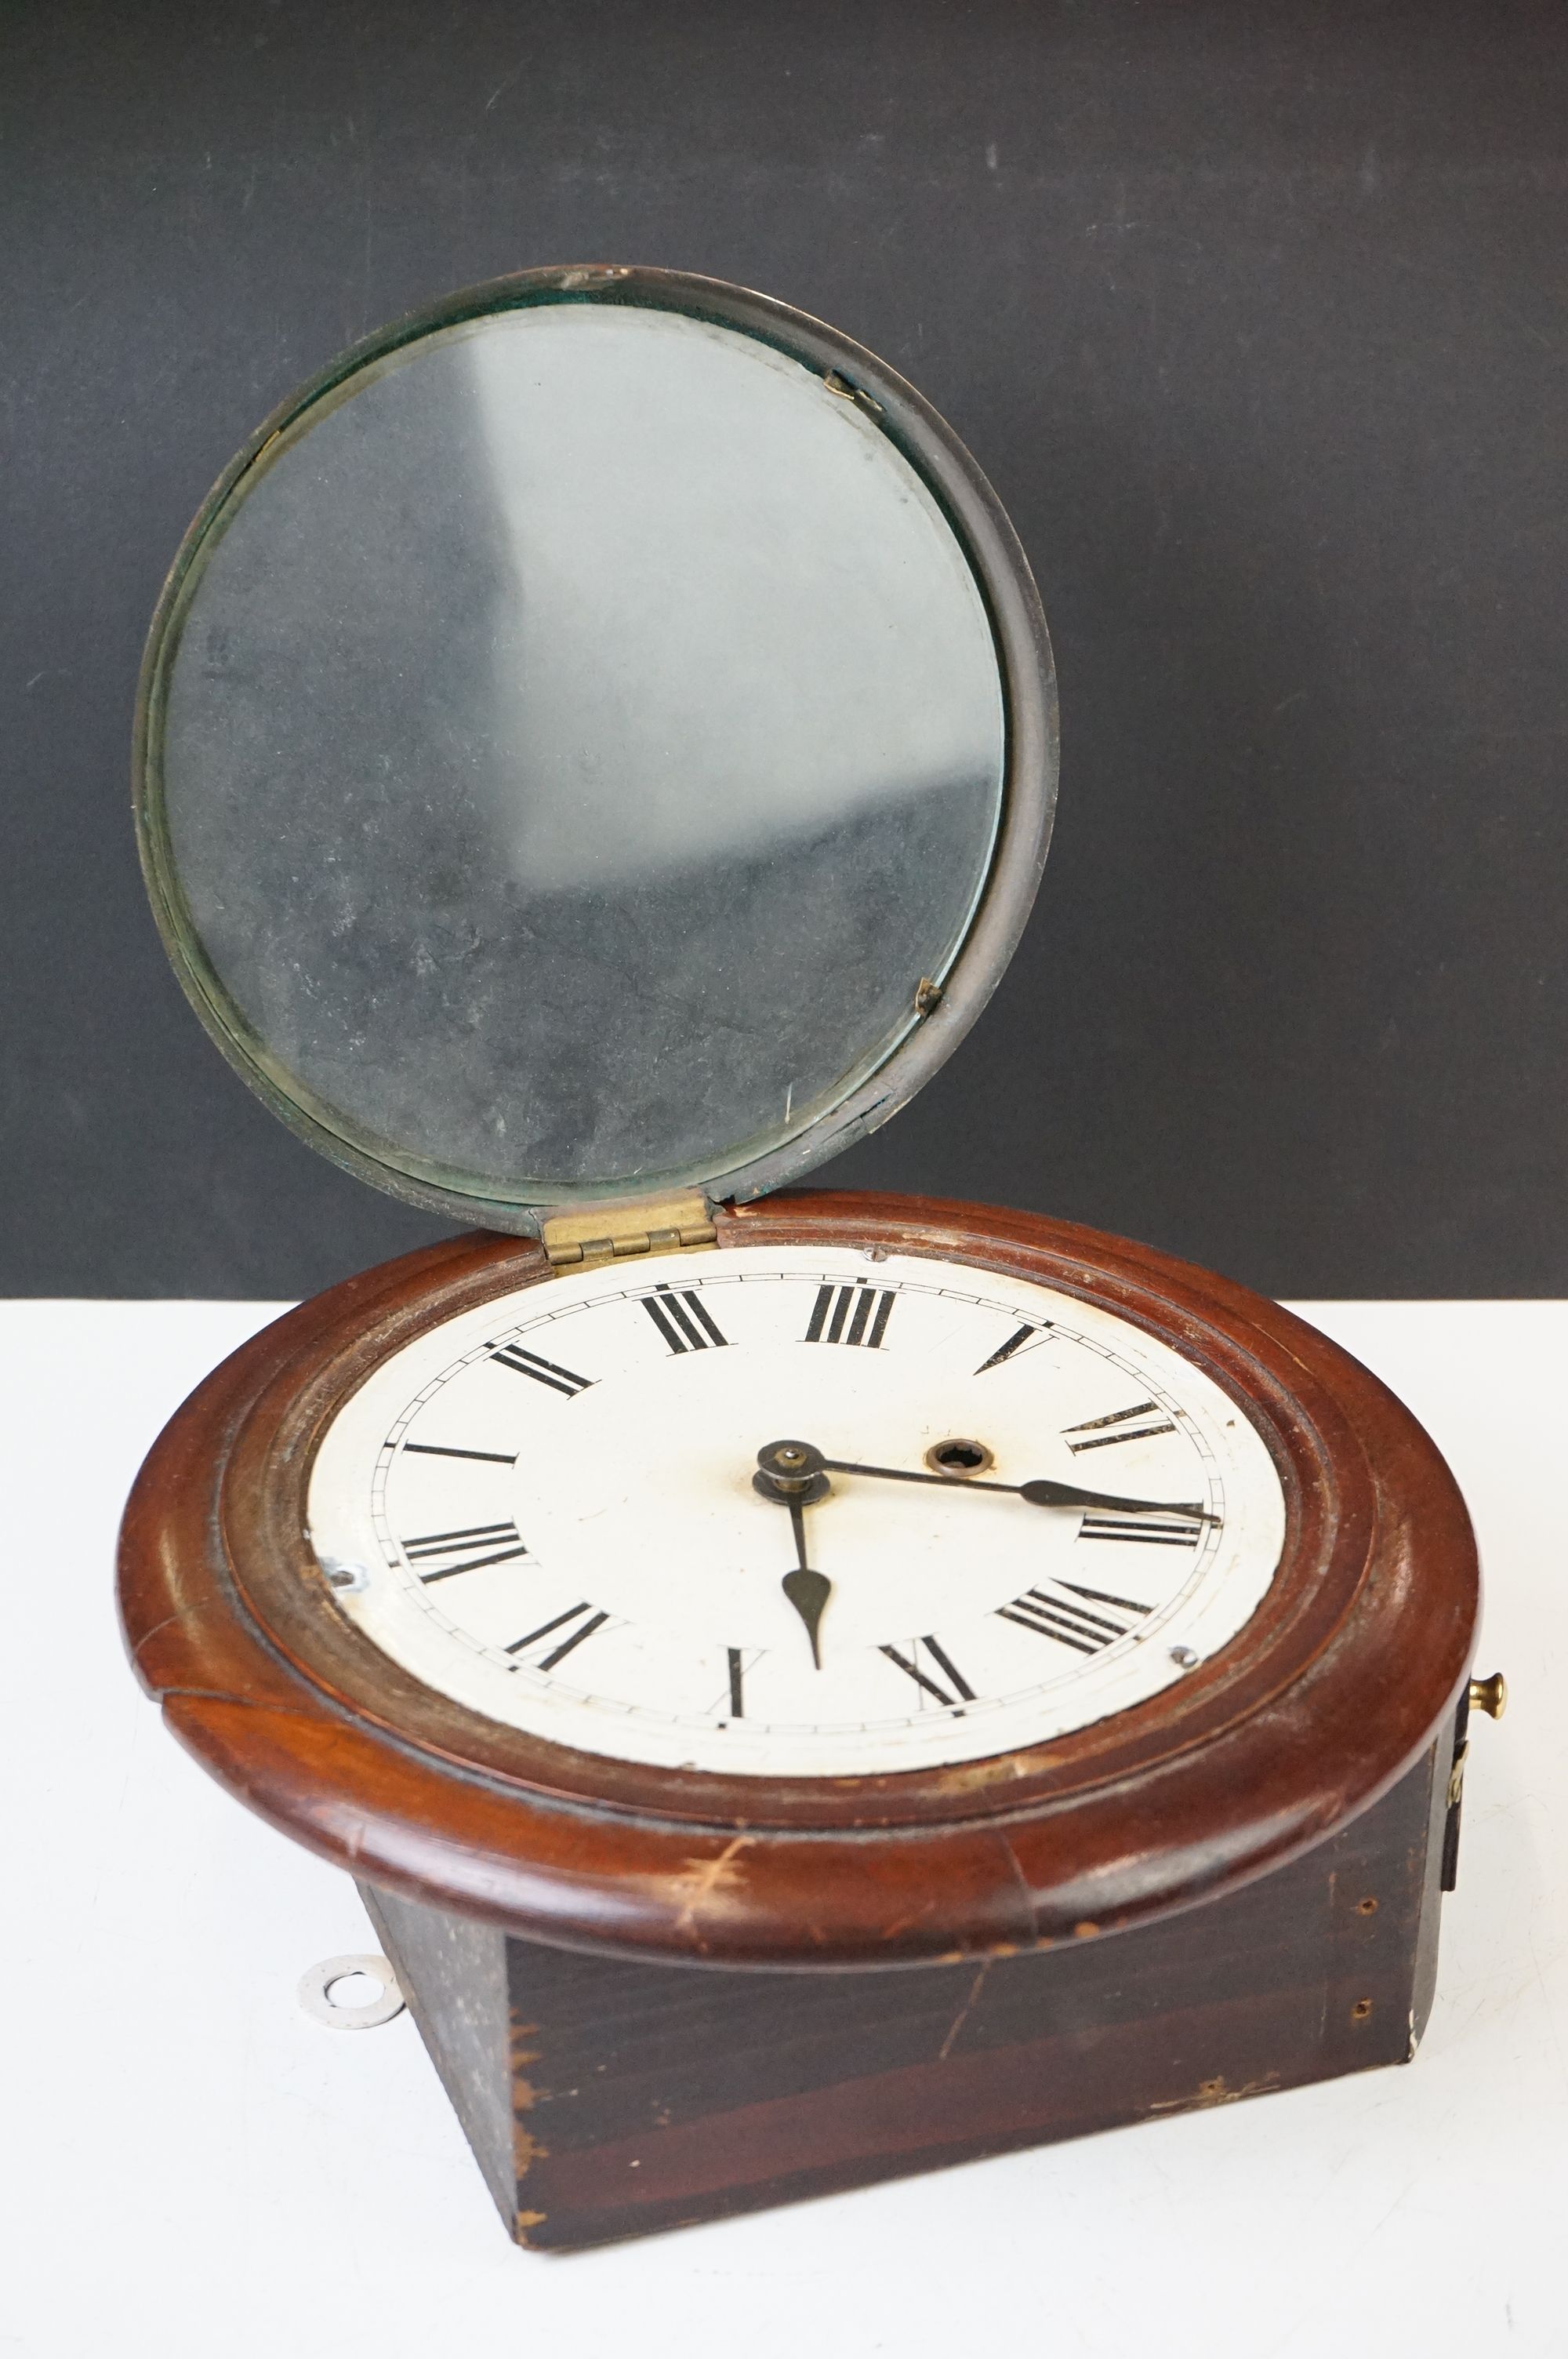 Late 19th / Early 20th century Mahogany Circular Wall Clock with cream dial, Roman numerals, poker - Image 3 of 7